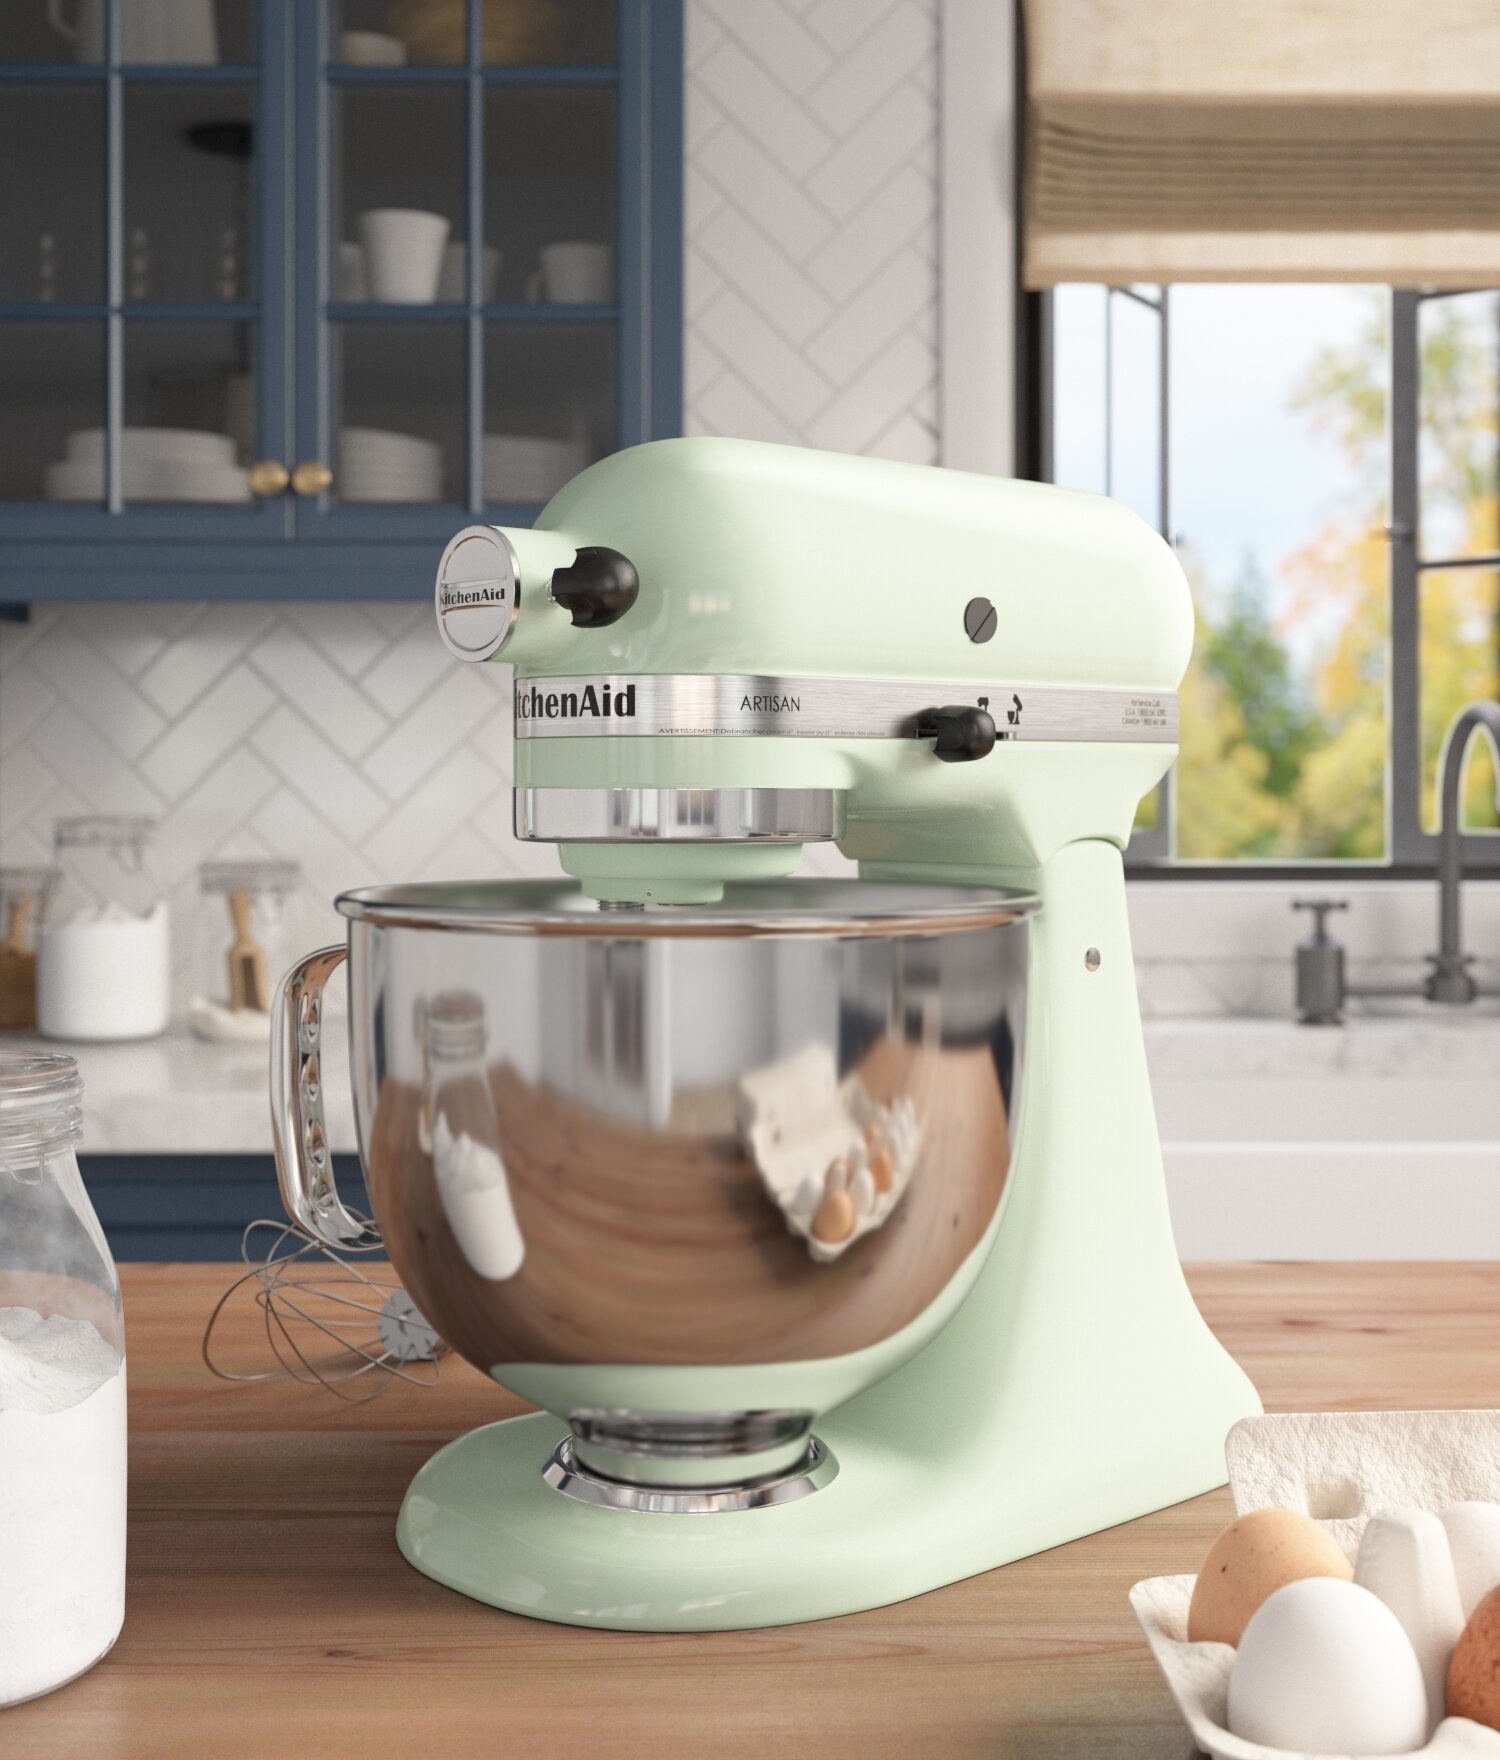 The mint green stand mixer with metal bowl